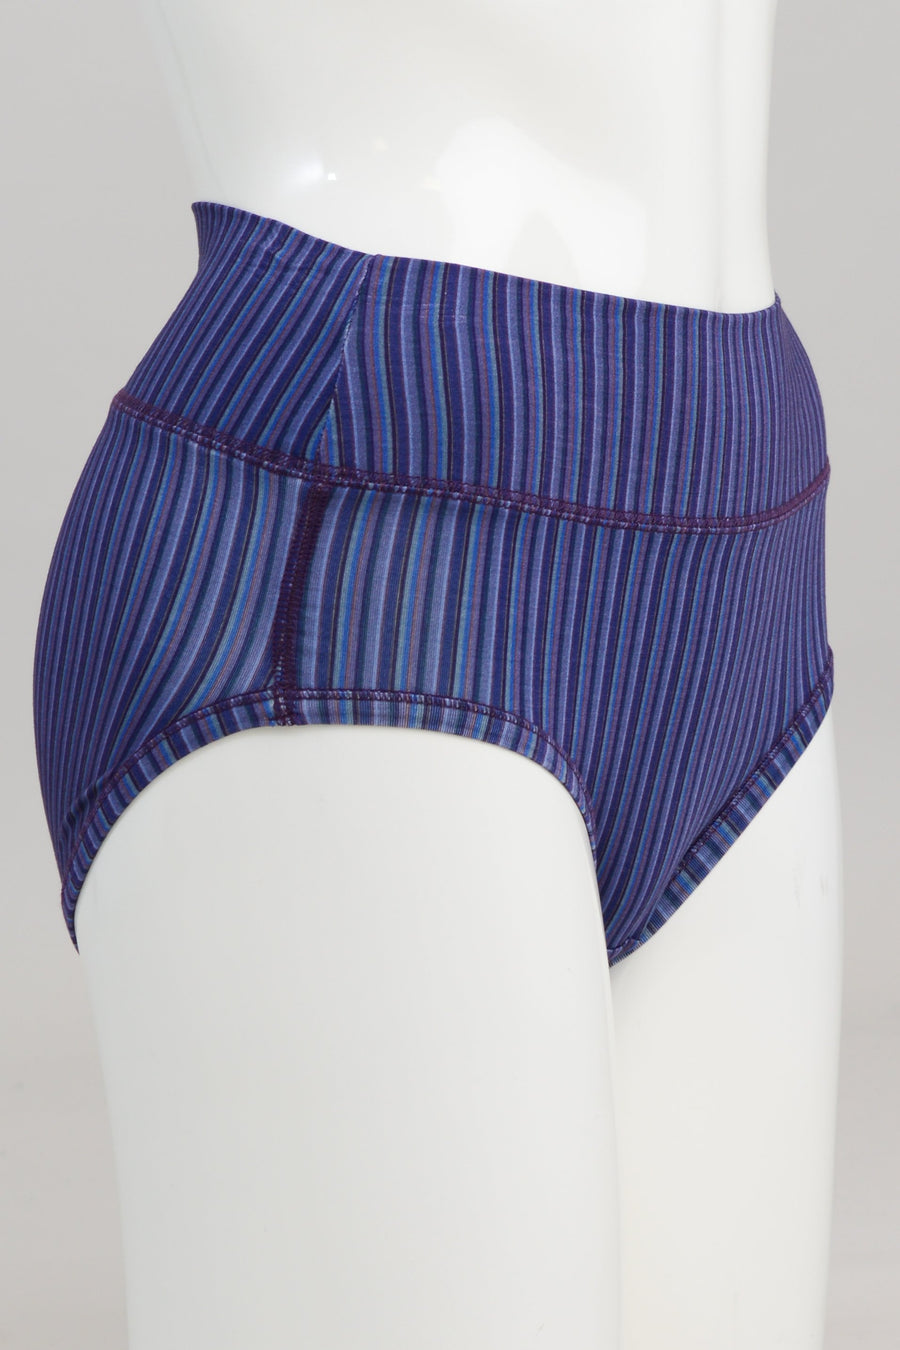 Blue Sky - La Gaunche Bamboo Underwear Violet Stripes Sustainable Panties All Things Being Eco